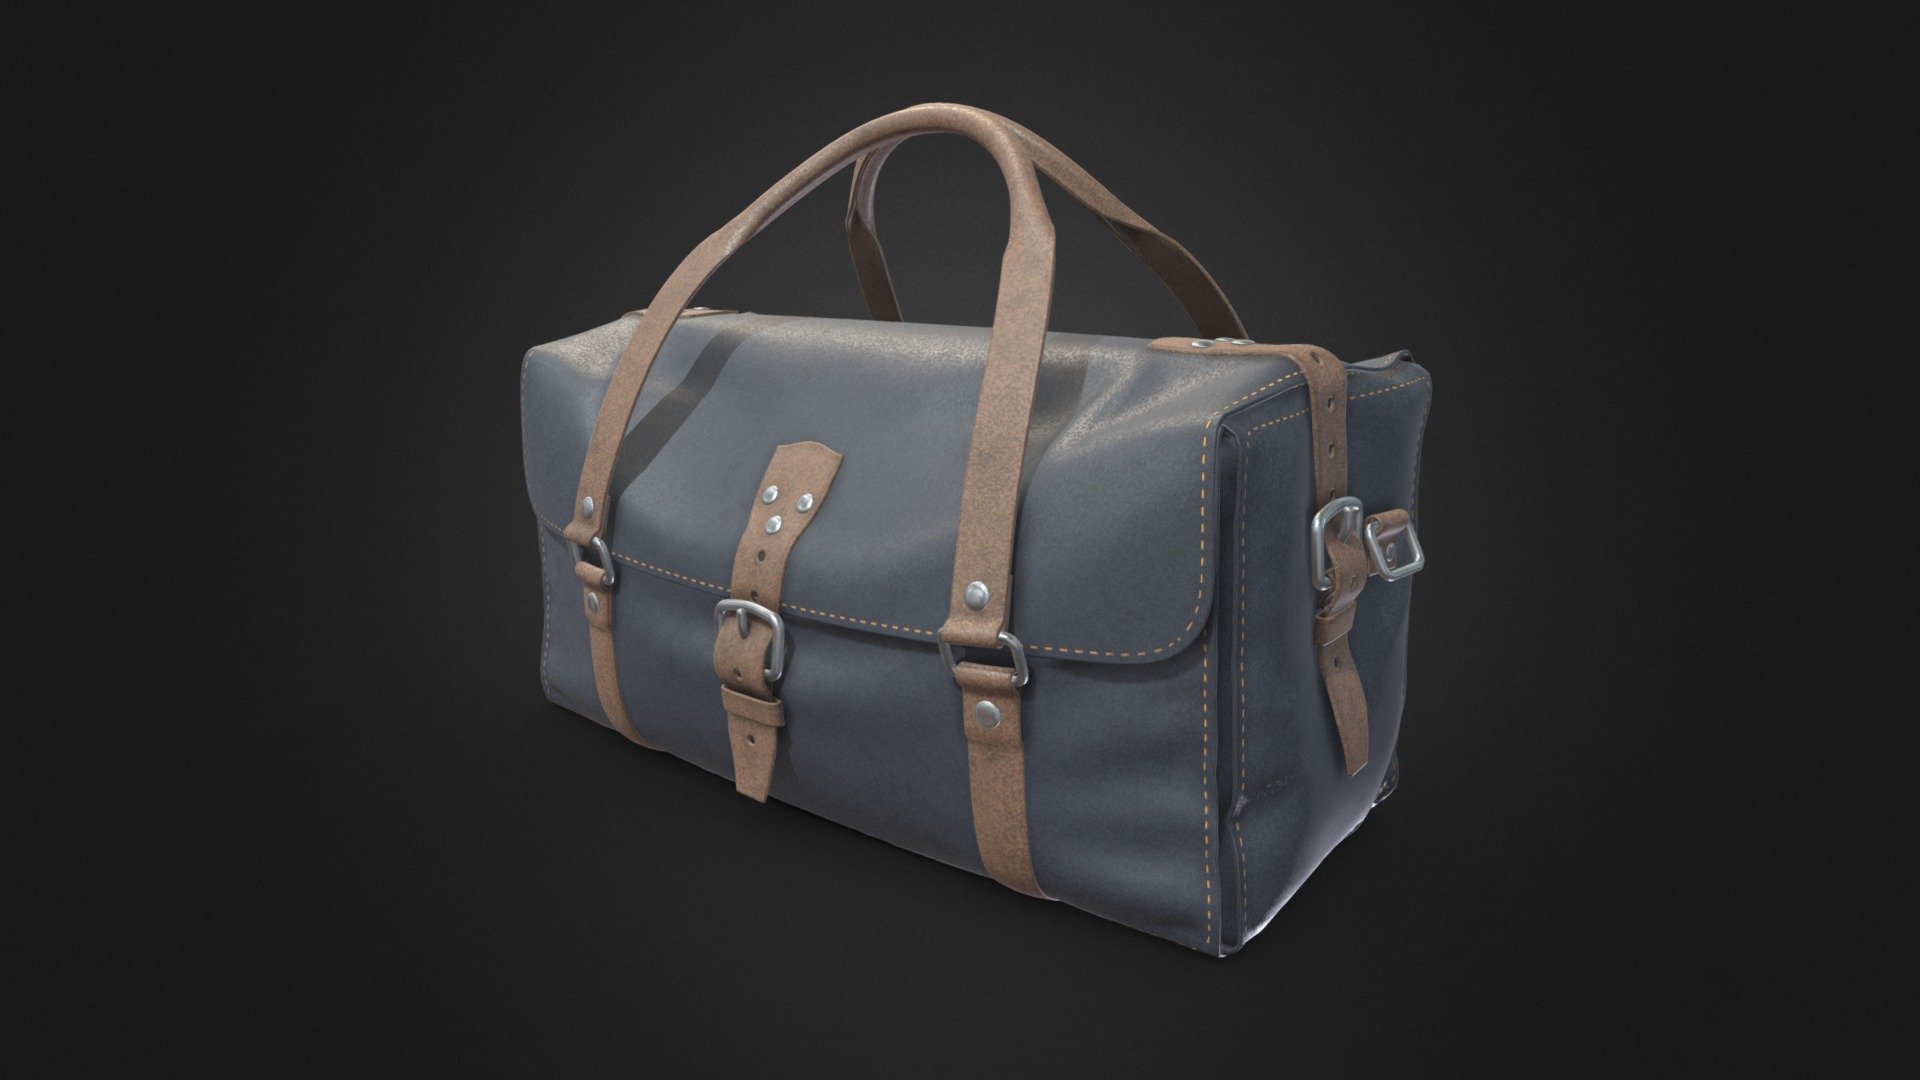 This is retextured version of Leather Bag Model of www.freepoly.org

Texture files in 4K (PBR) Diffuse Map, Metallic Map ,AO Map, Normal Map, Roughness Map

Other Versions: https://skfb.ly/oHtQZ

Original Model: https://skfb.ly/oARzs - Leather Bag v2 (PBR Material) - Download Free 3D model by alitural 3d model